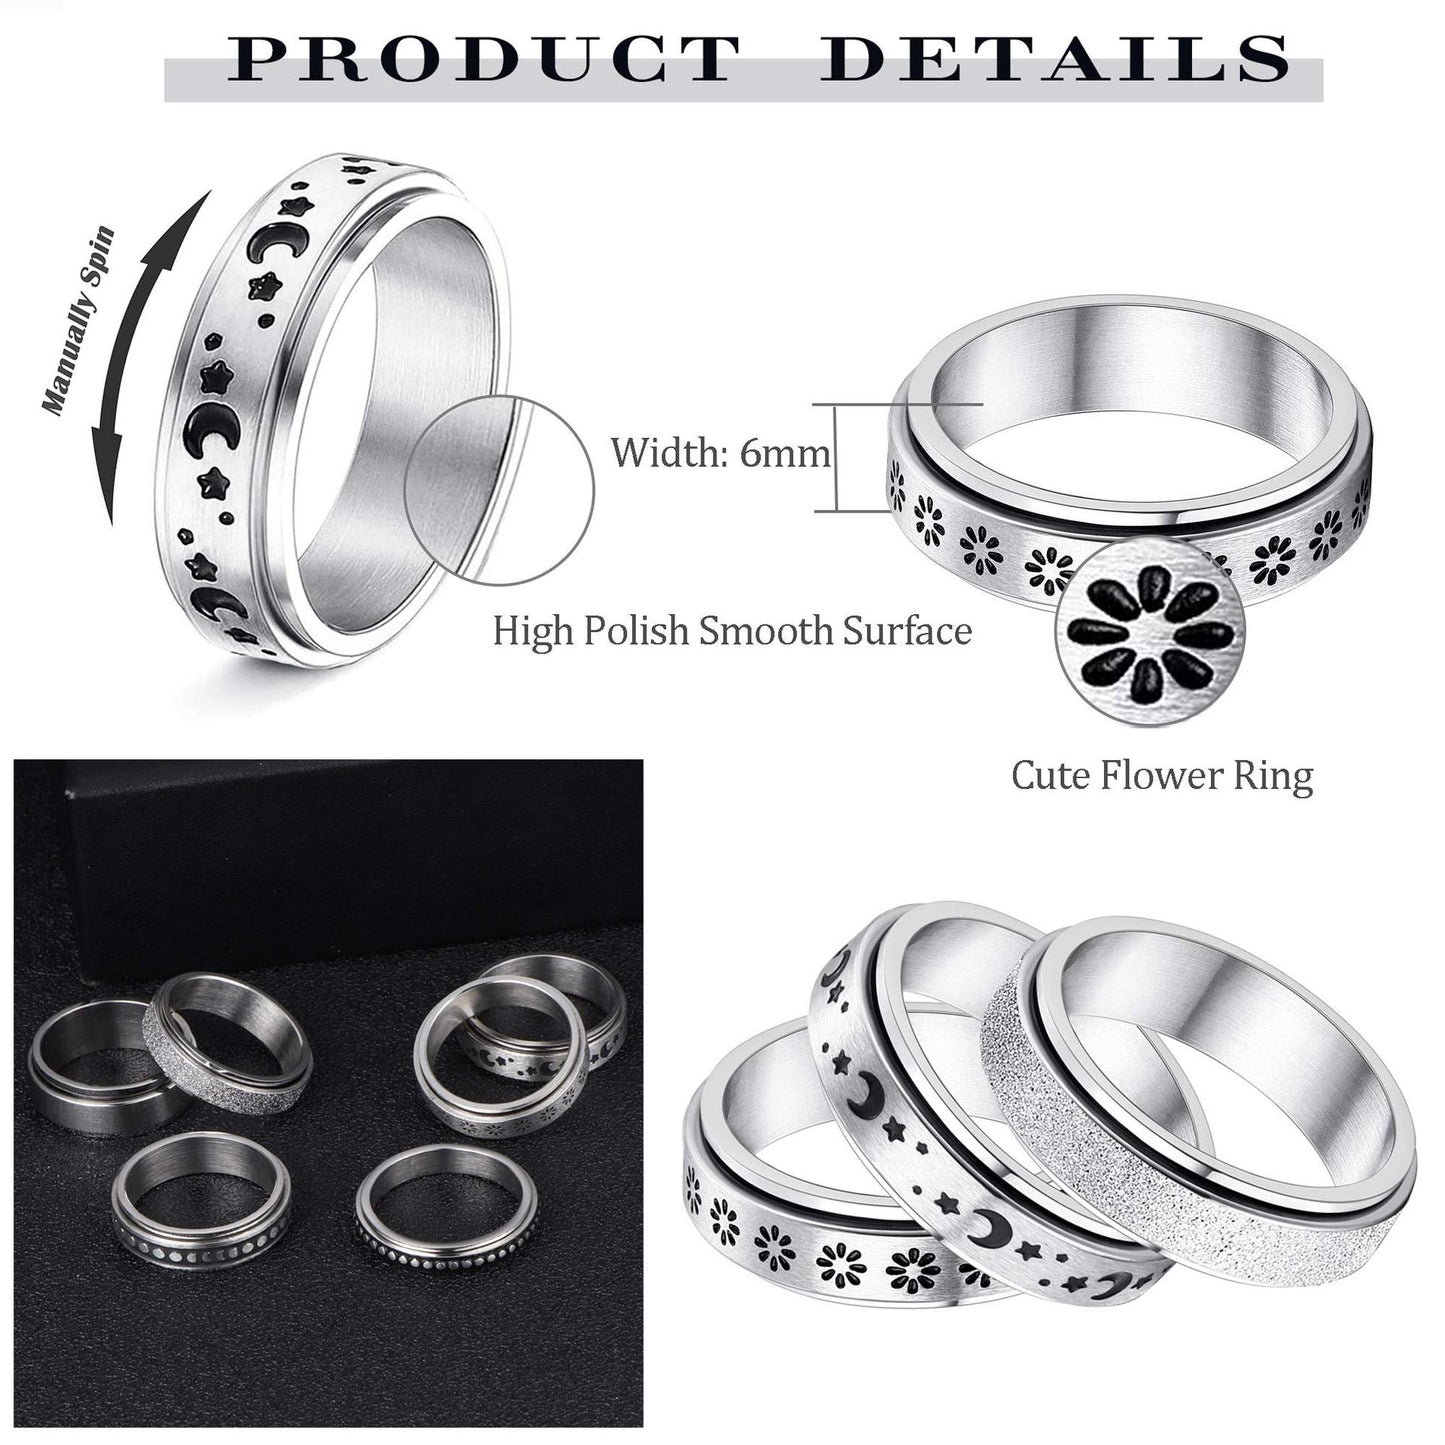 Stainless Steel Rotatable Spinner Anxiety Rings